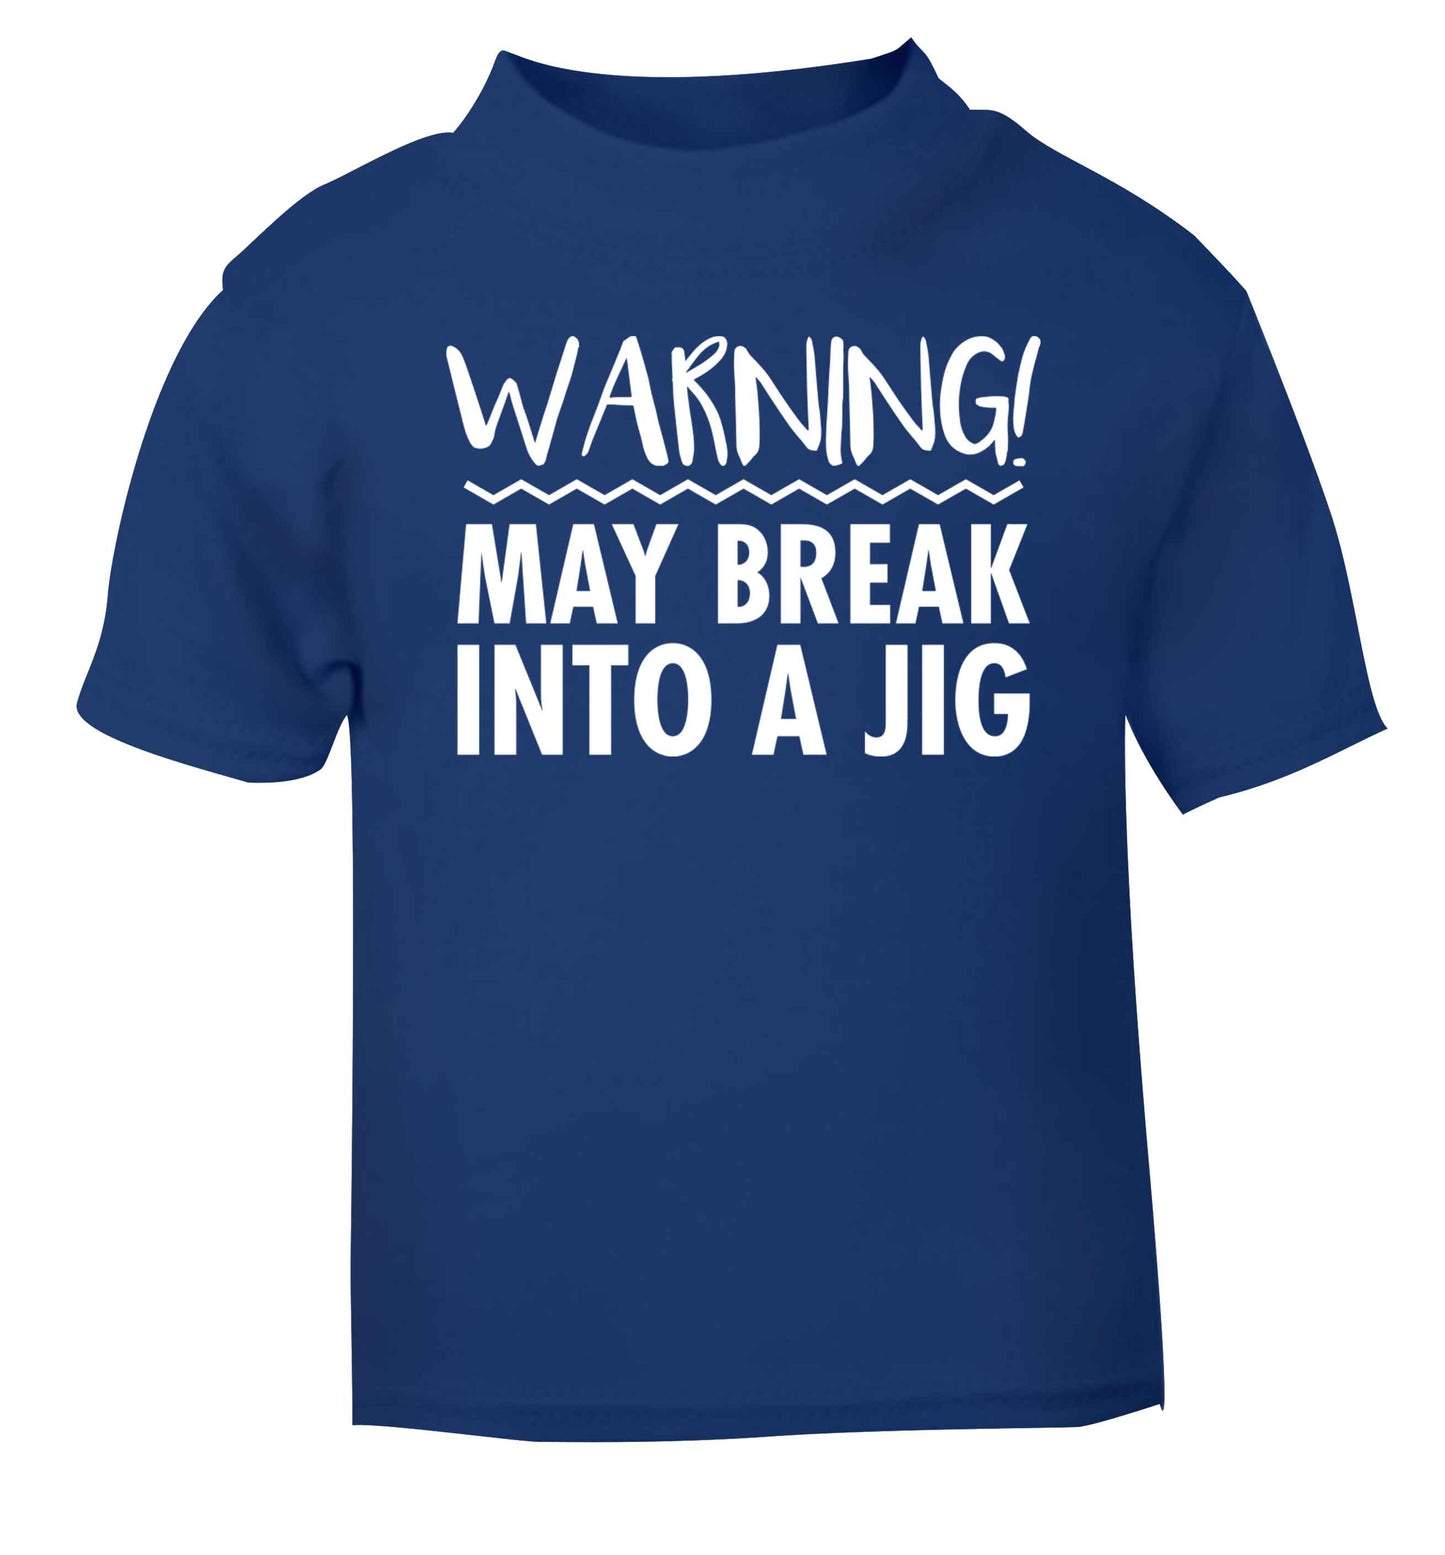 Warning may break into a jig blue baby toddler Tshirt 2 Years